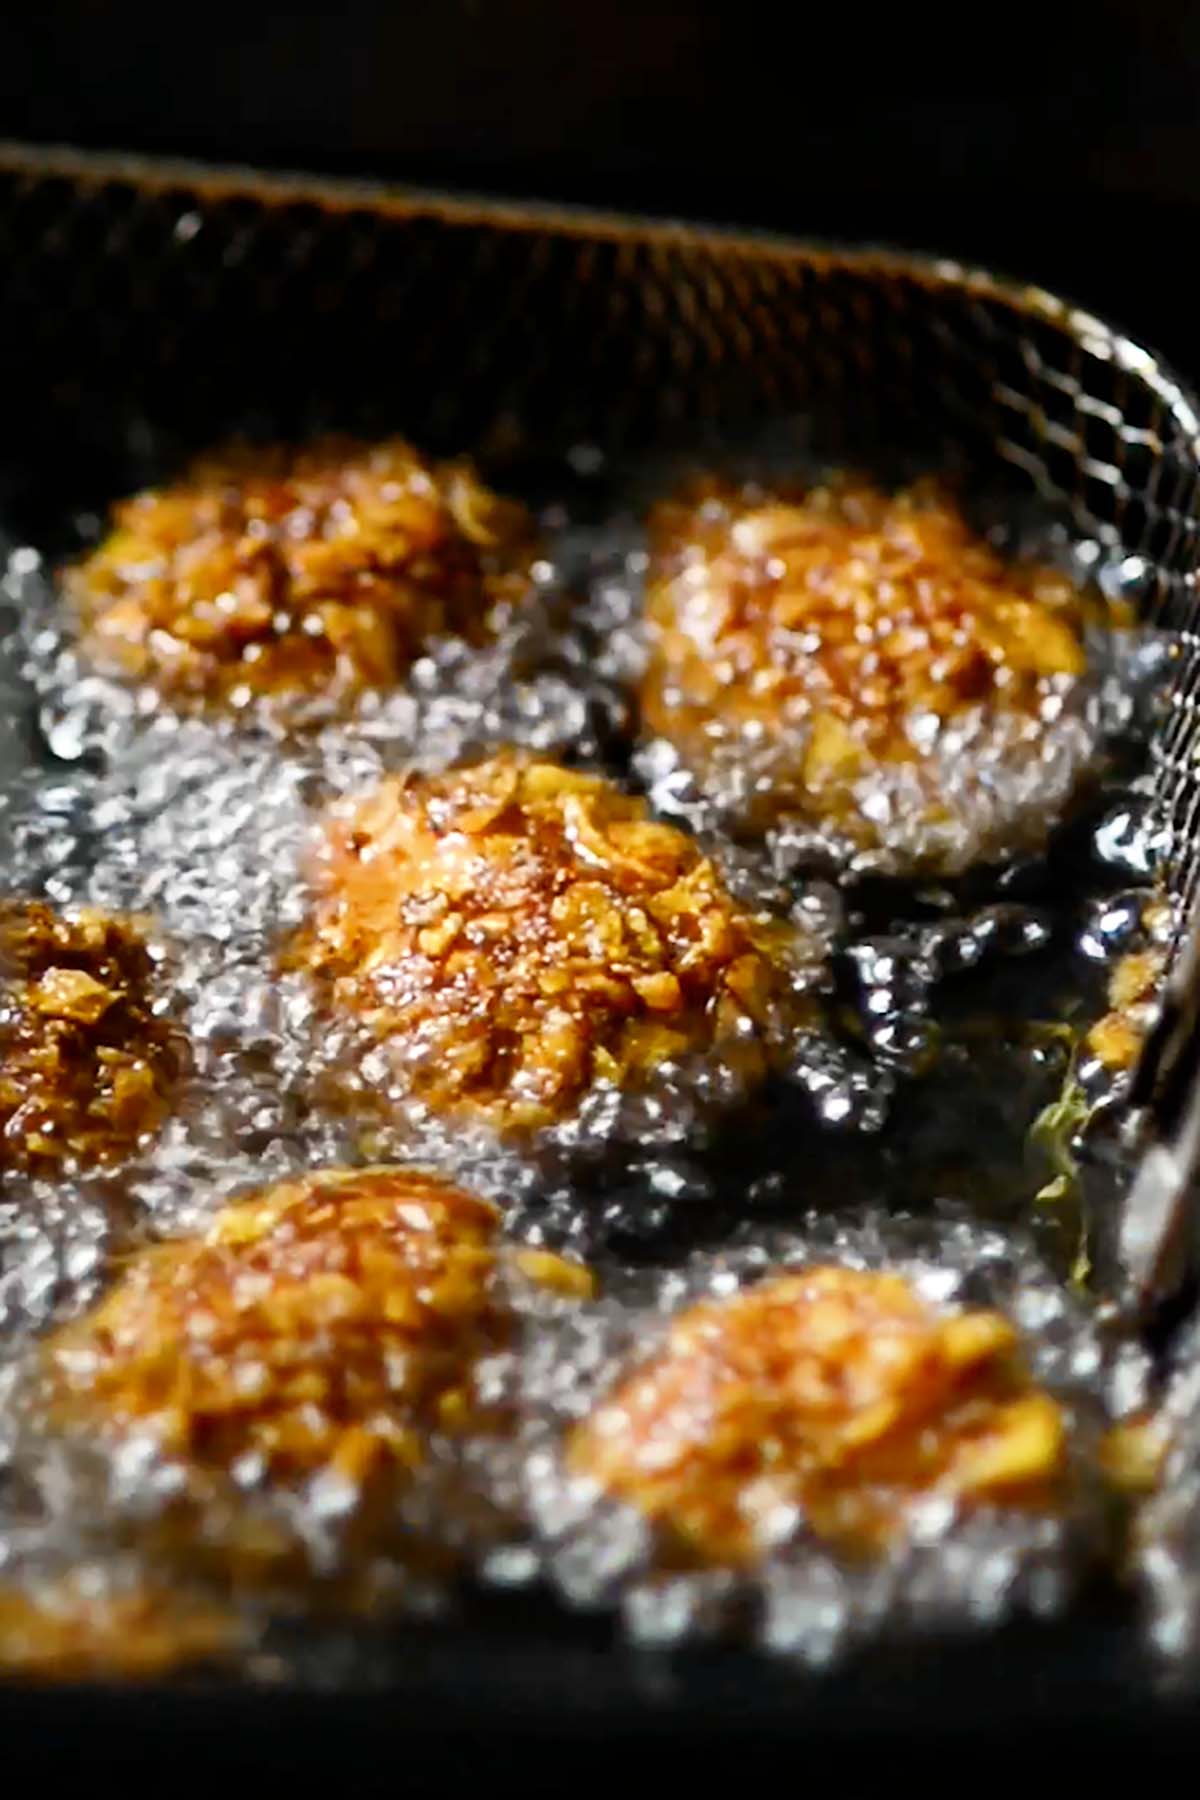 Frosted flake covered cheesecake balls deep frying in a fryer.